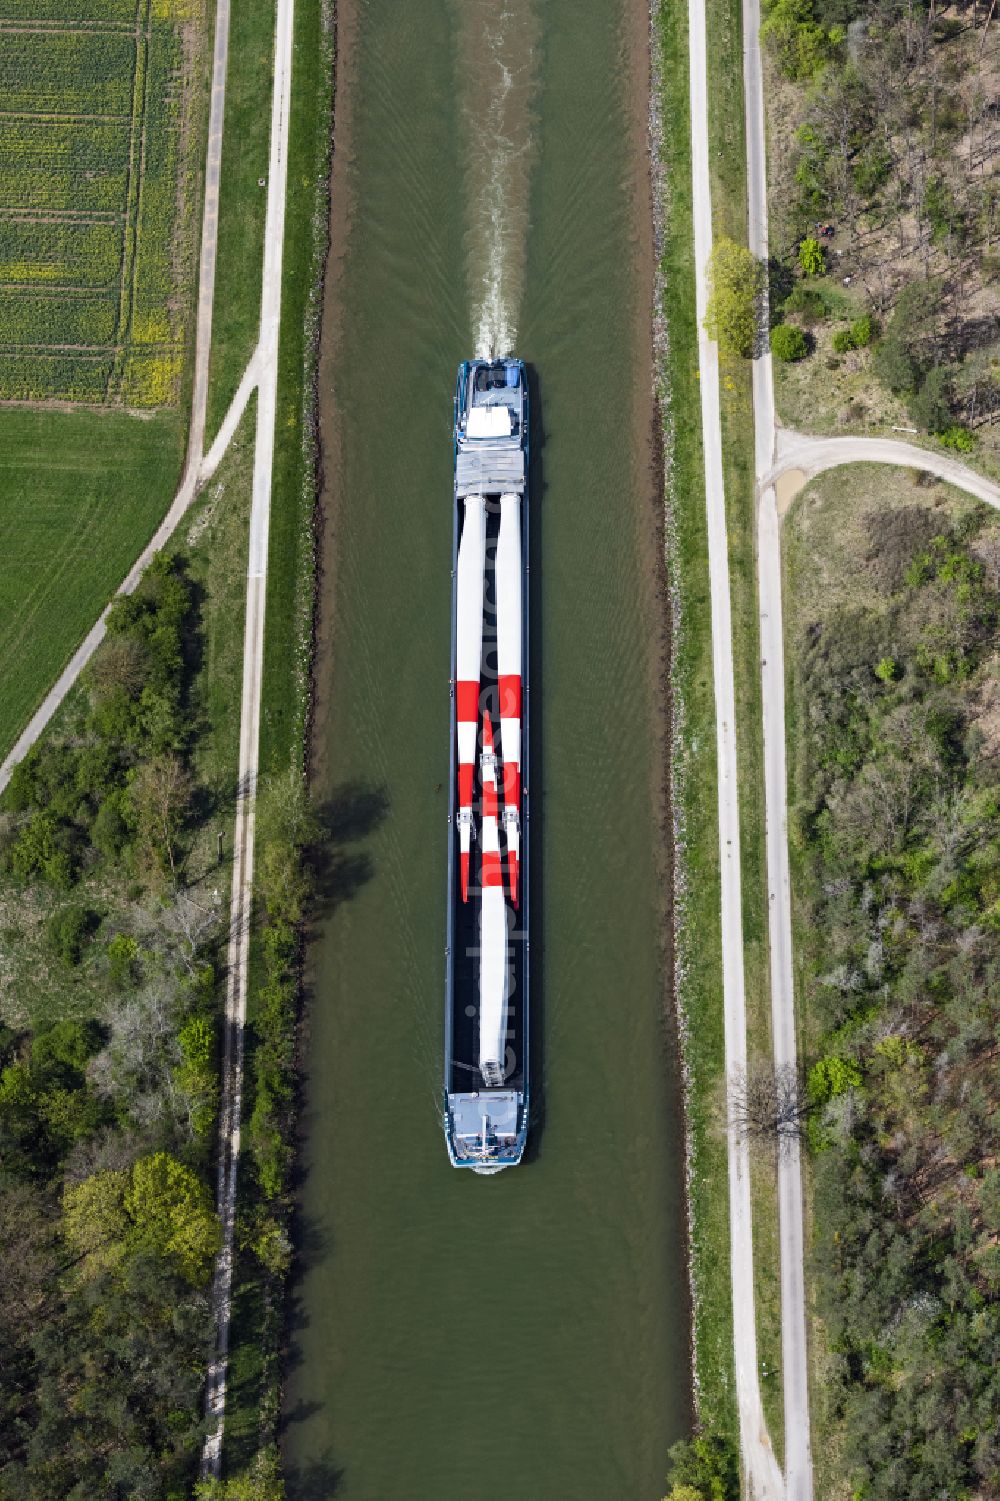 Bamberg from the bird's eye view: Ships and barge trains inland waterway transport in driving on the waterway of the river of Regnitz beladen with grossen Windrad Blaettern in Bamberg in the state Bavaria, Germany